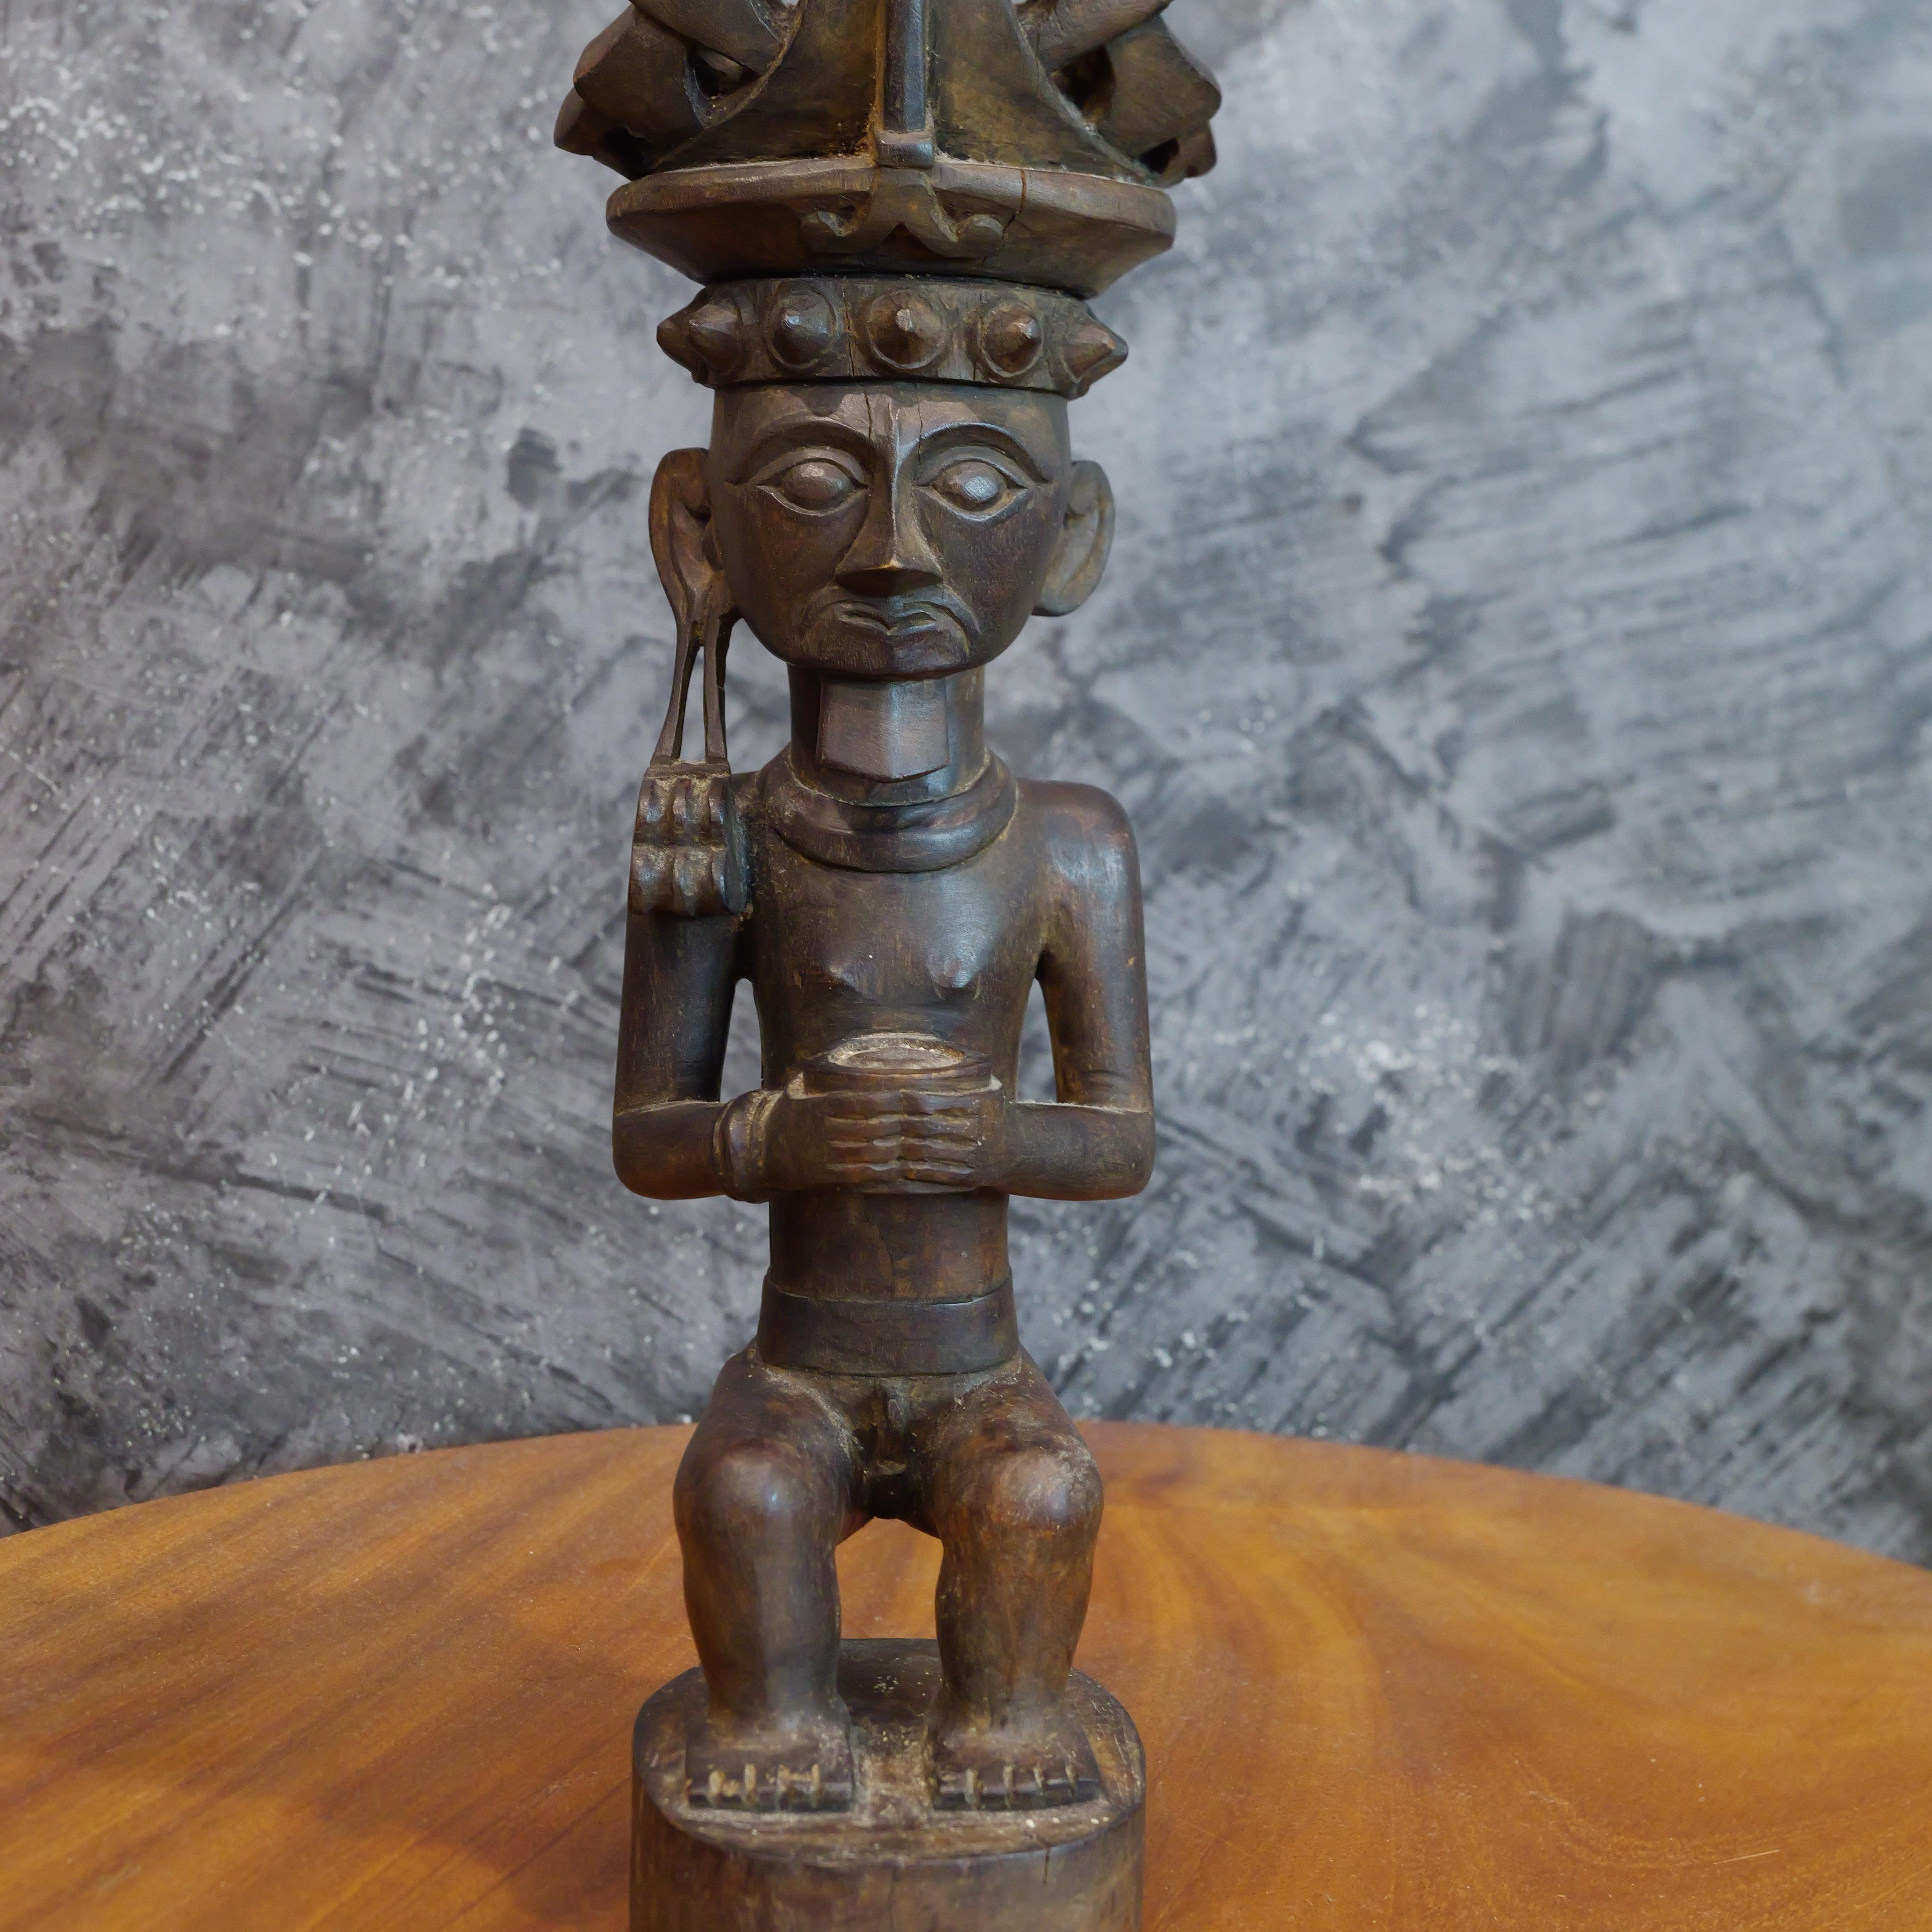 This wooden statue from Siraha Salawa, a noble Nias ancestor figure from Indonesia, is a striking example of Nias artistry and cultural heritage. Carved from a single piece of wood, this statue stands tall and proud, embodying the strength and